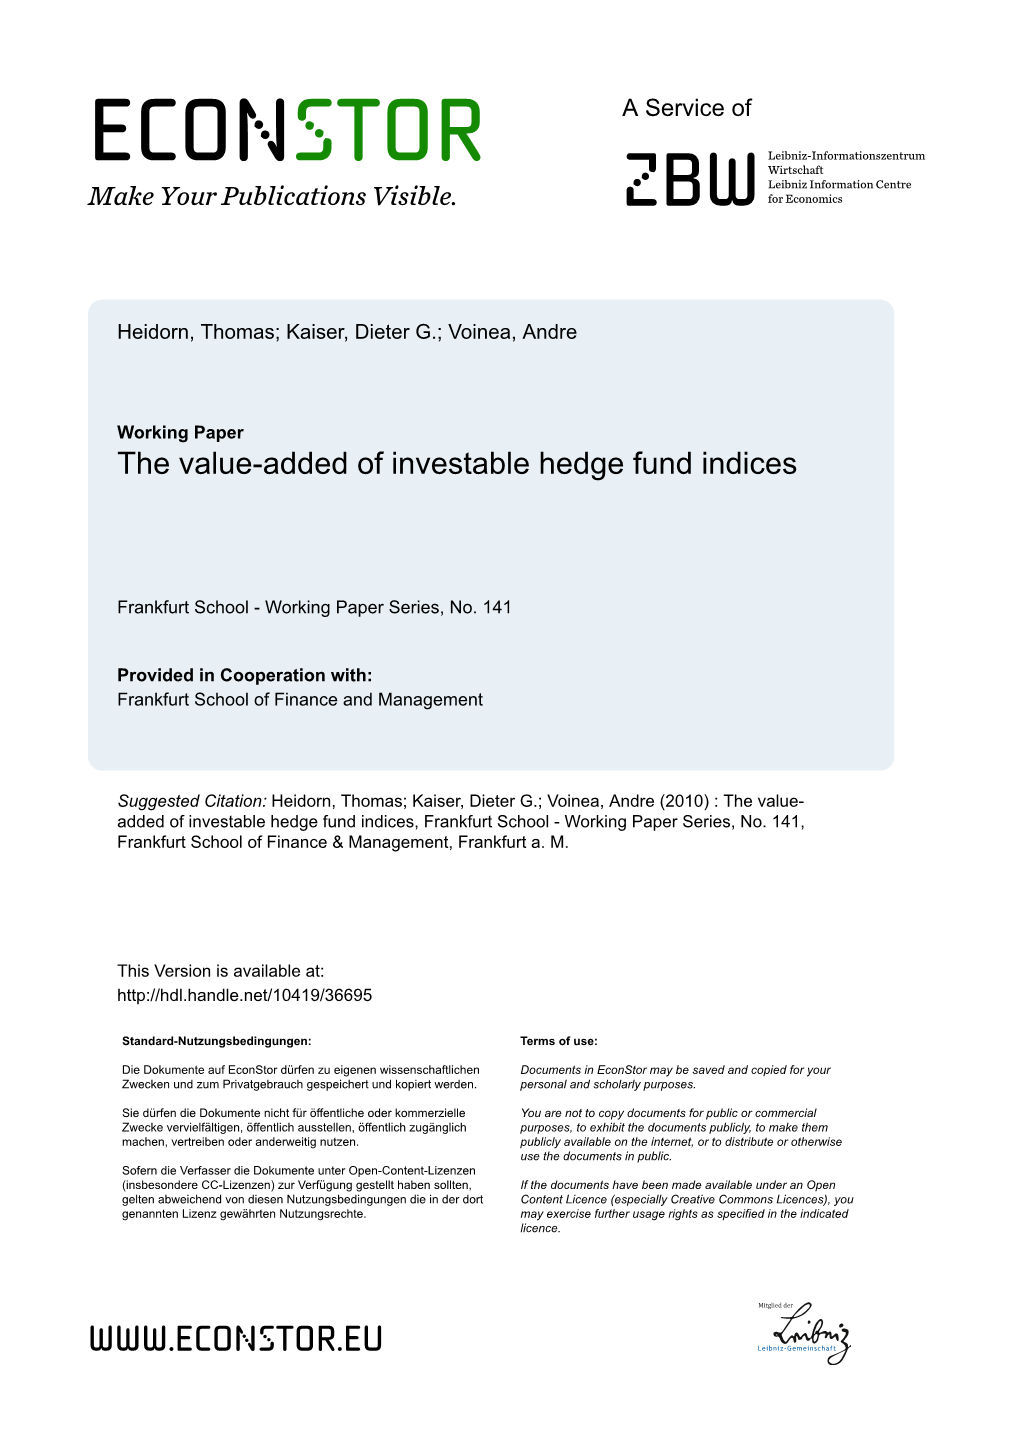 The Value-Added of Investable Hedge Fund Indices